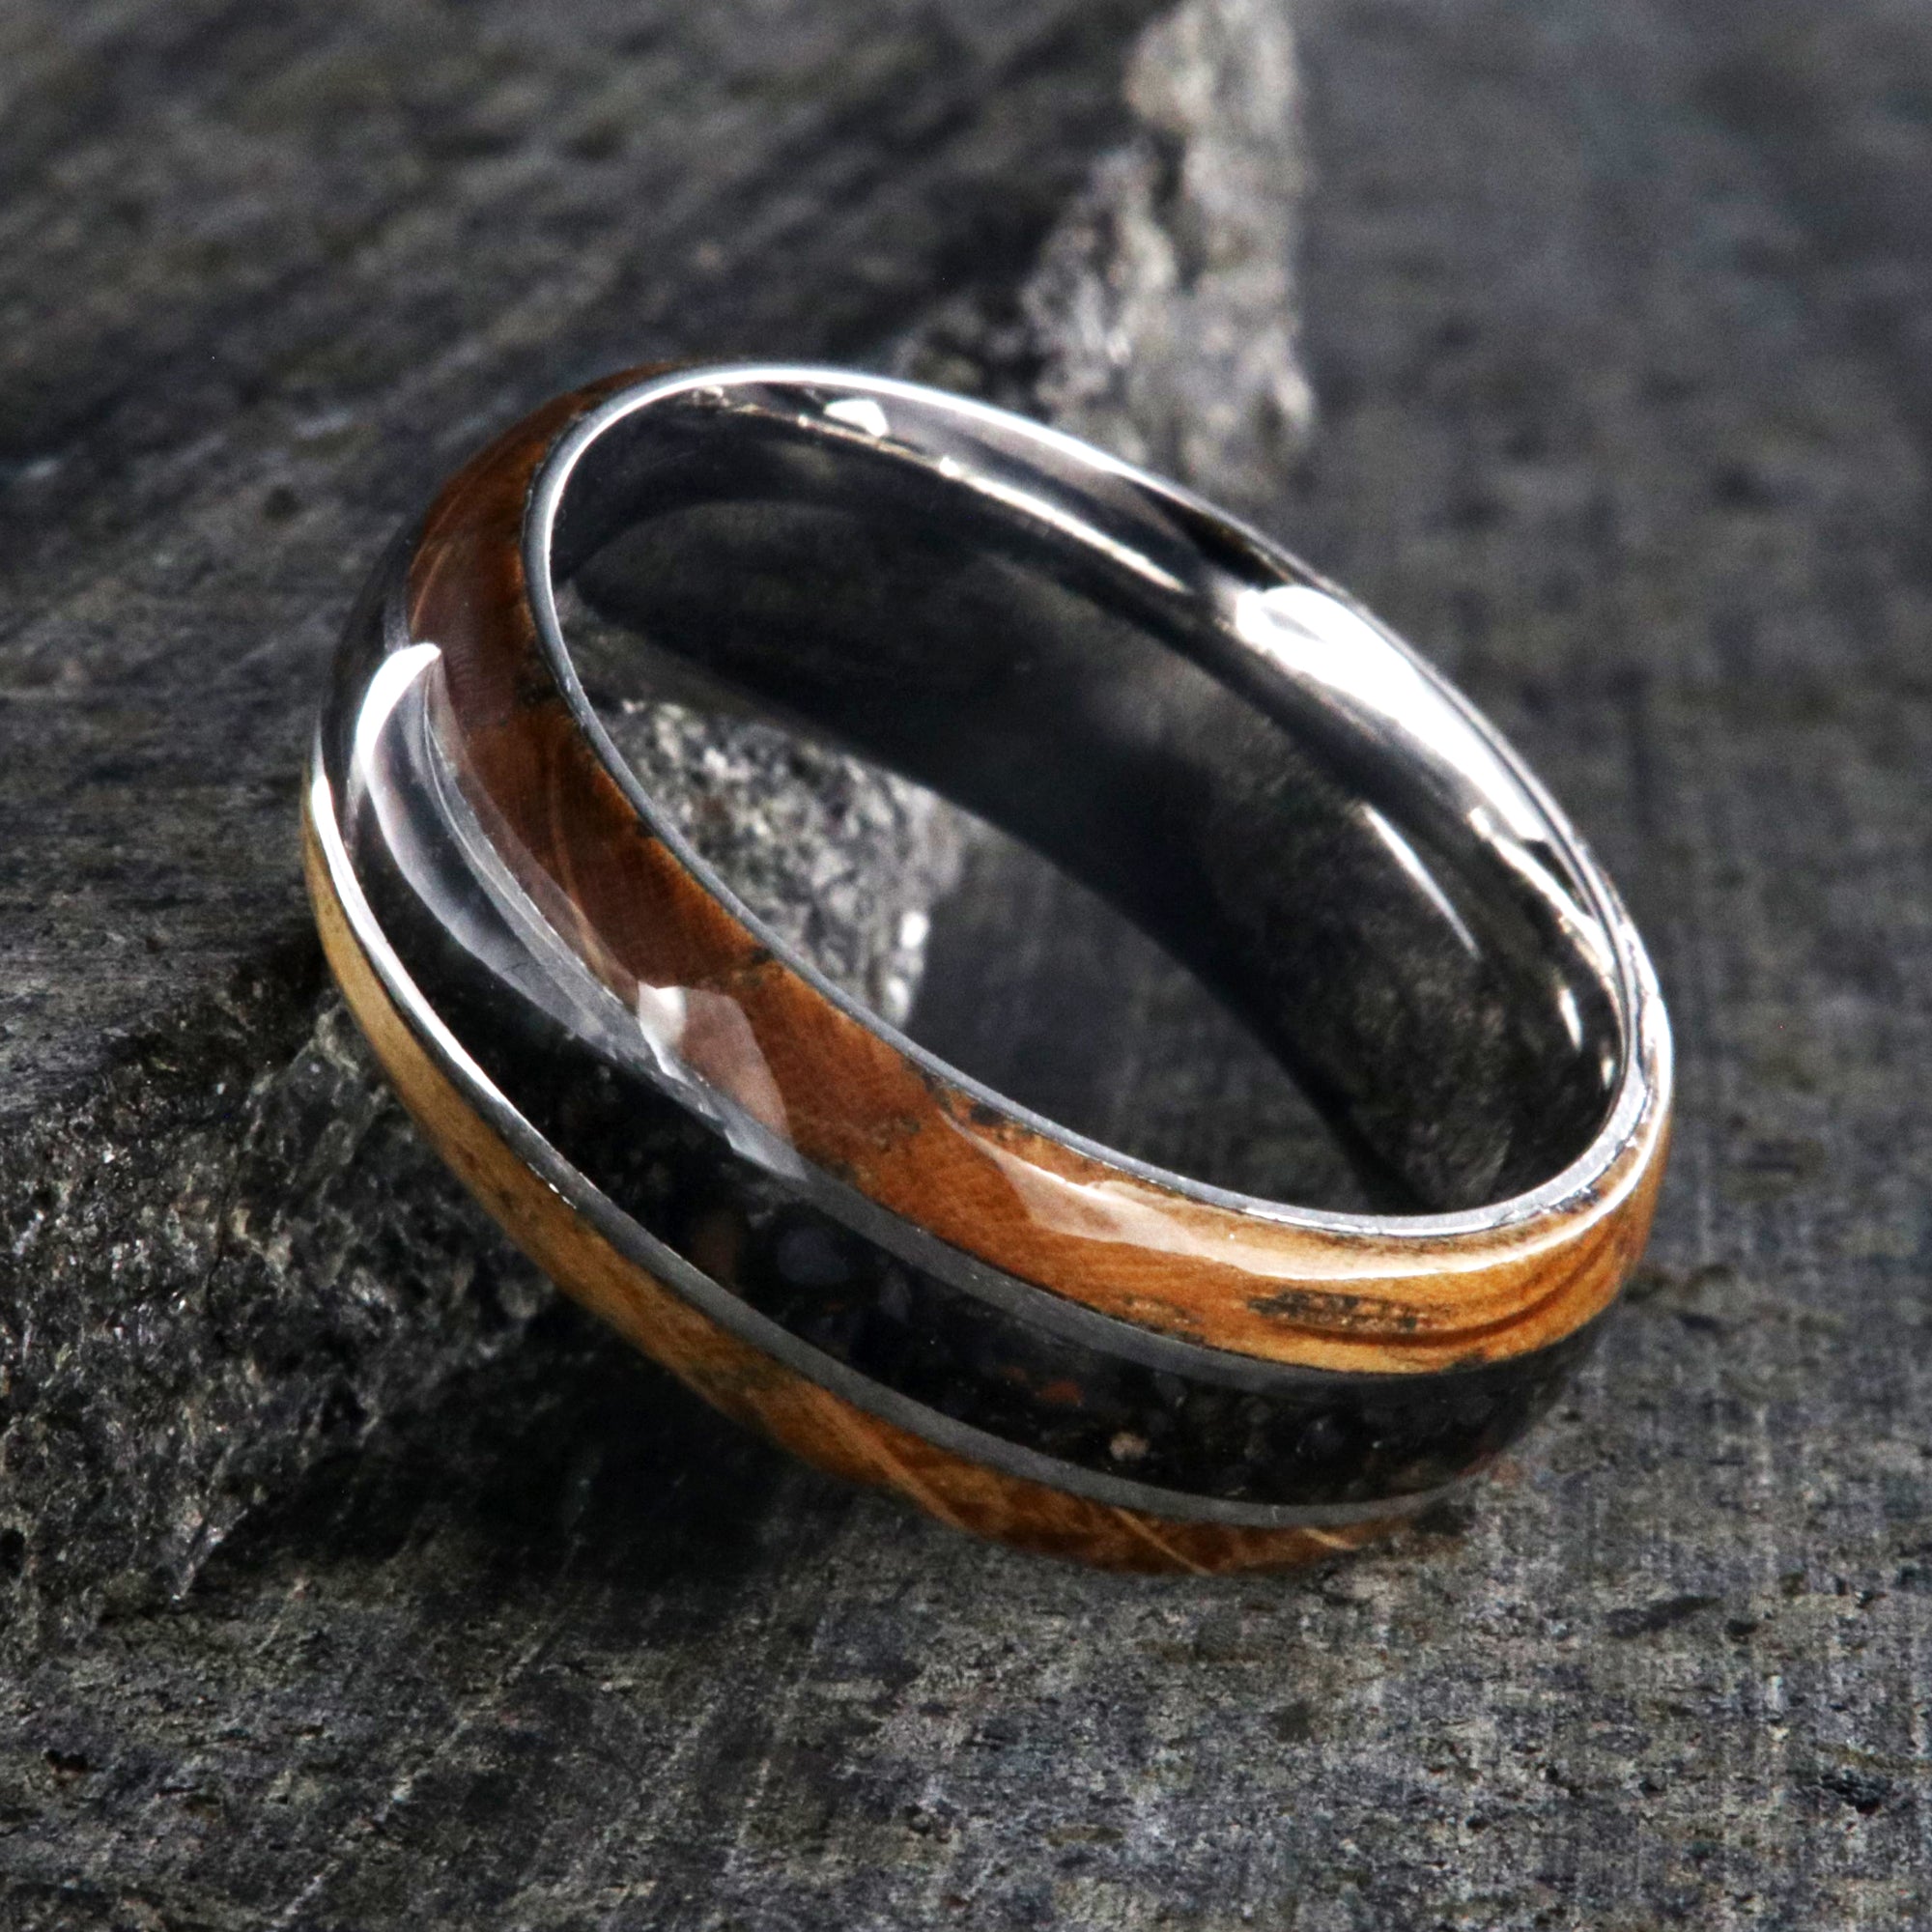 8mm wide cobalt wedding band with a center dinosaur bone inlay and whiskey barrel edges